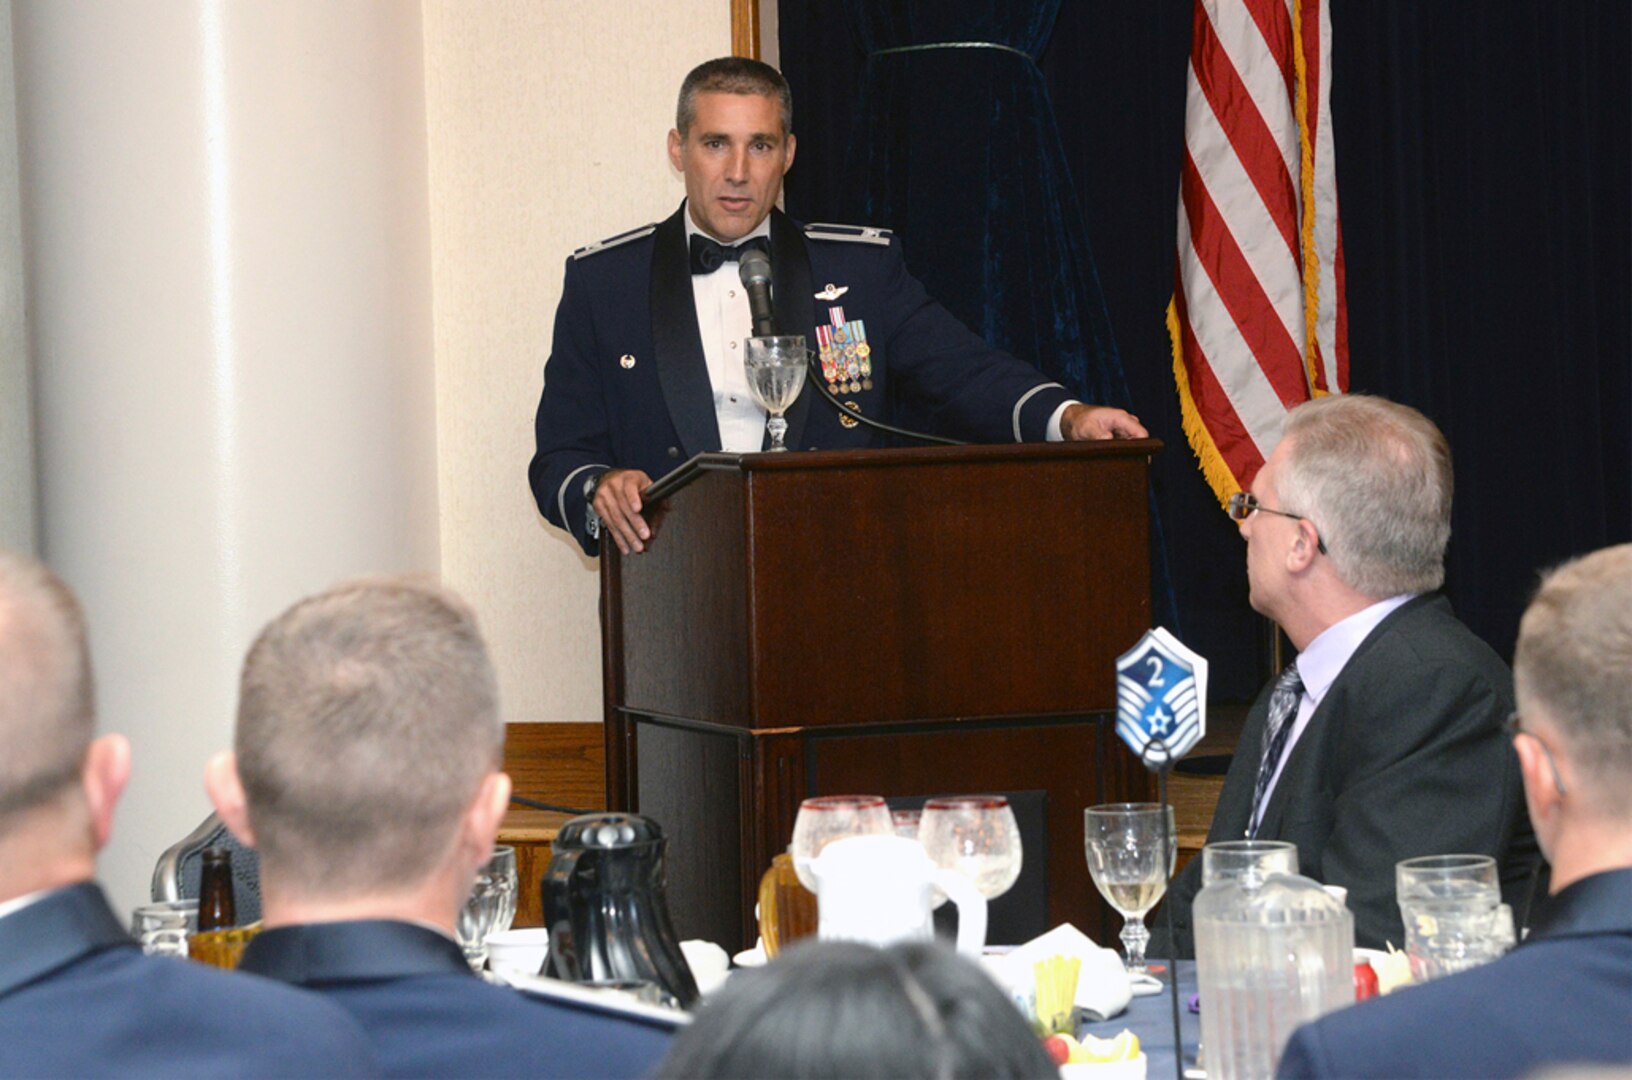 Col. Matthew Isler, 12th Flying Training Wing commander, addresses the attendees of the senior noncommissioned officer induction ceremony Aug. 22 at Joint Base San Antonio-Randolph. The SNCO induction ceremony is held to recognize individuals who progress through the ranks and have been selected for promotion to master sergeant, transitioning them to senior leadership level with more responsibility. (U.S. Air Force photo by Johnny Saldivar) 

